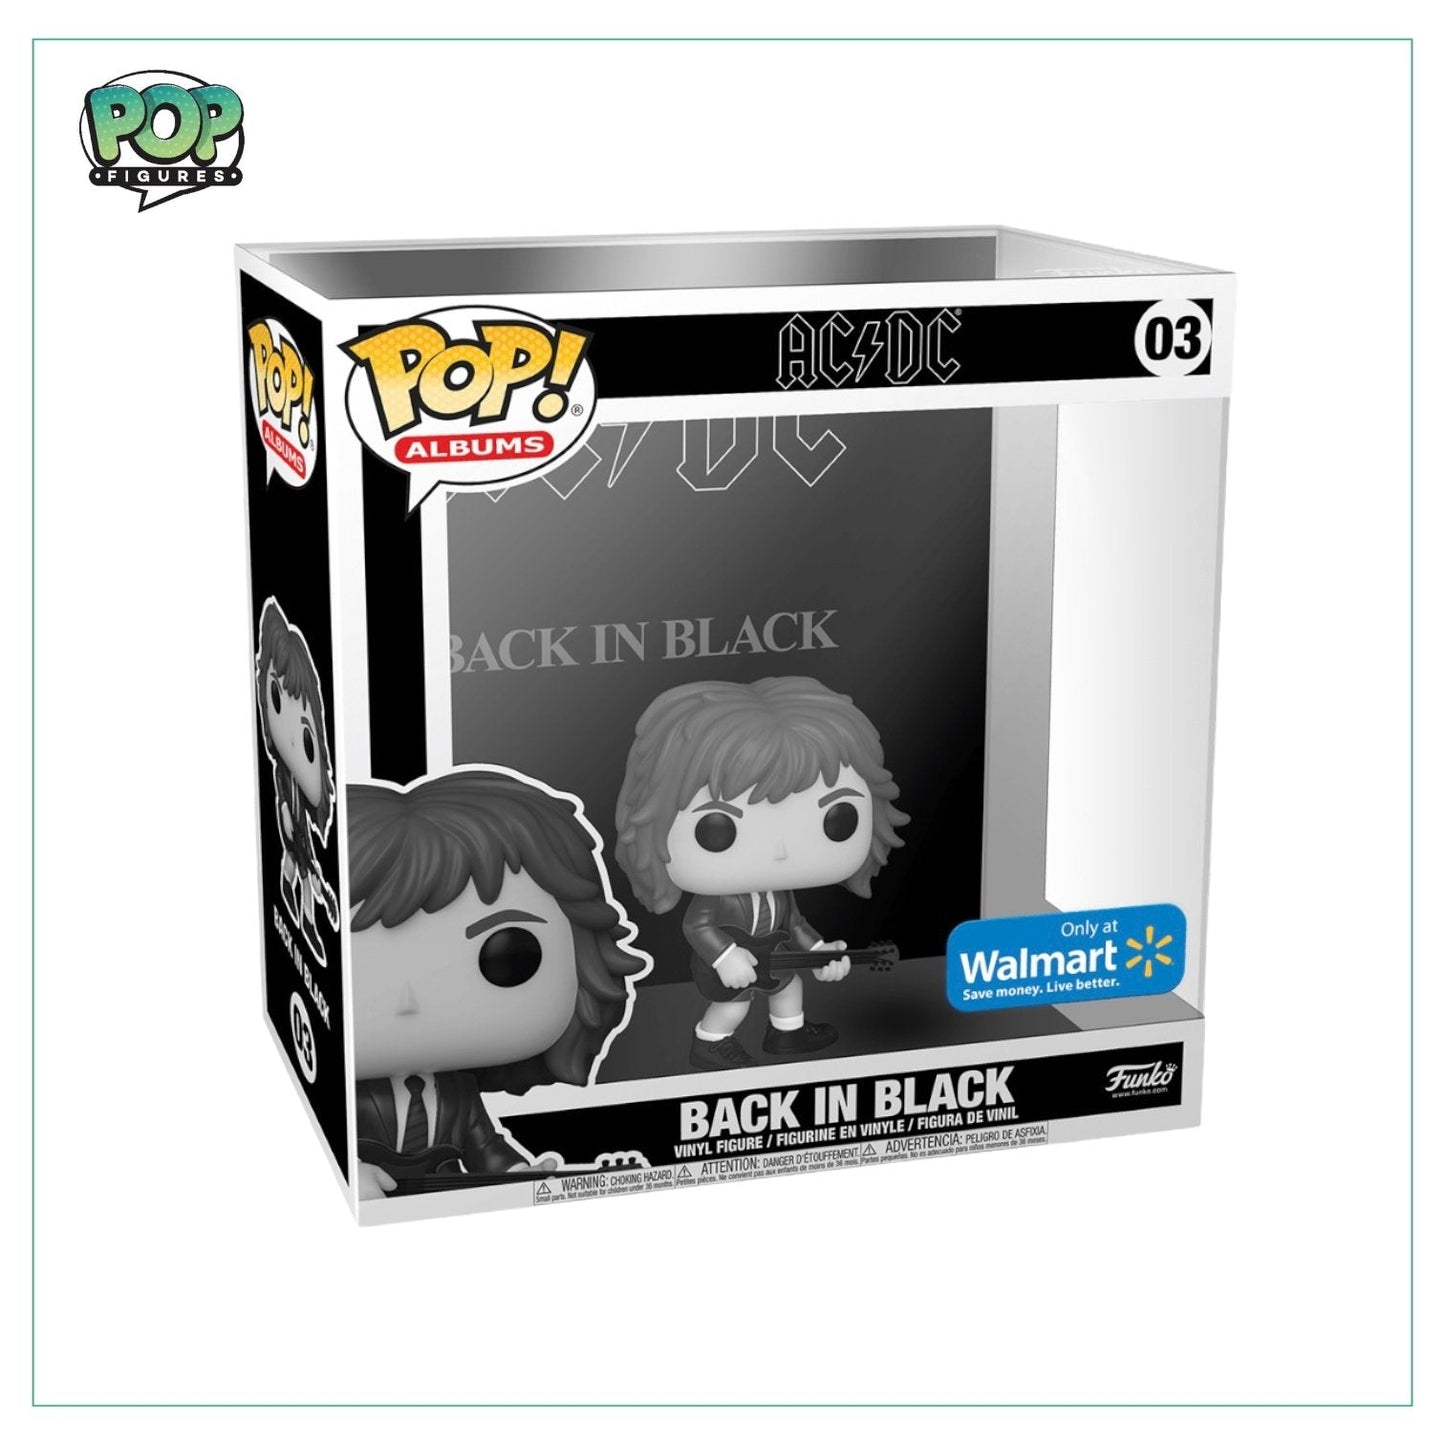 Back in Black #03 Funko Pop! AC/DC - Walmart Exclusive - Angry Cat